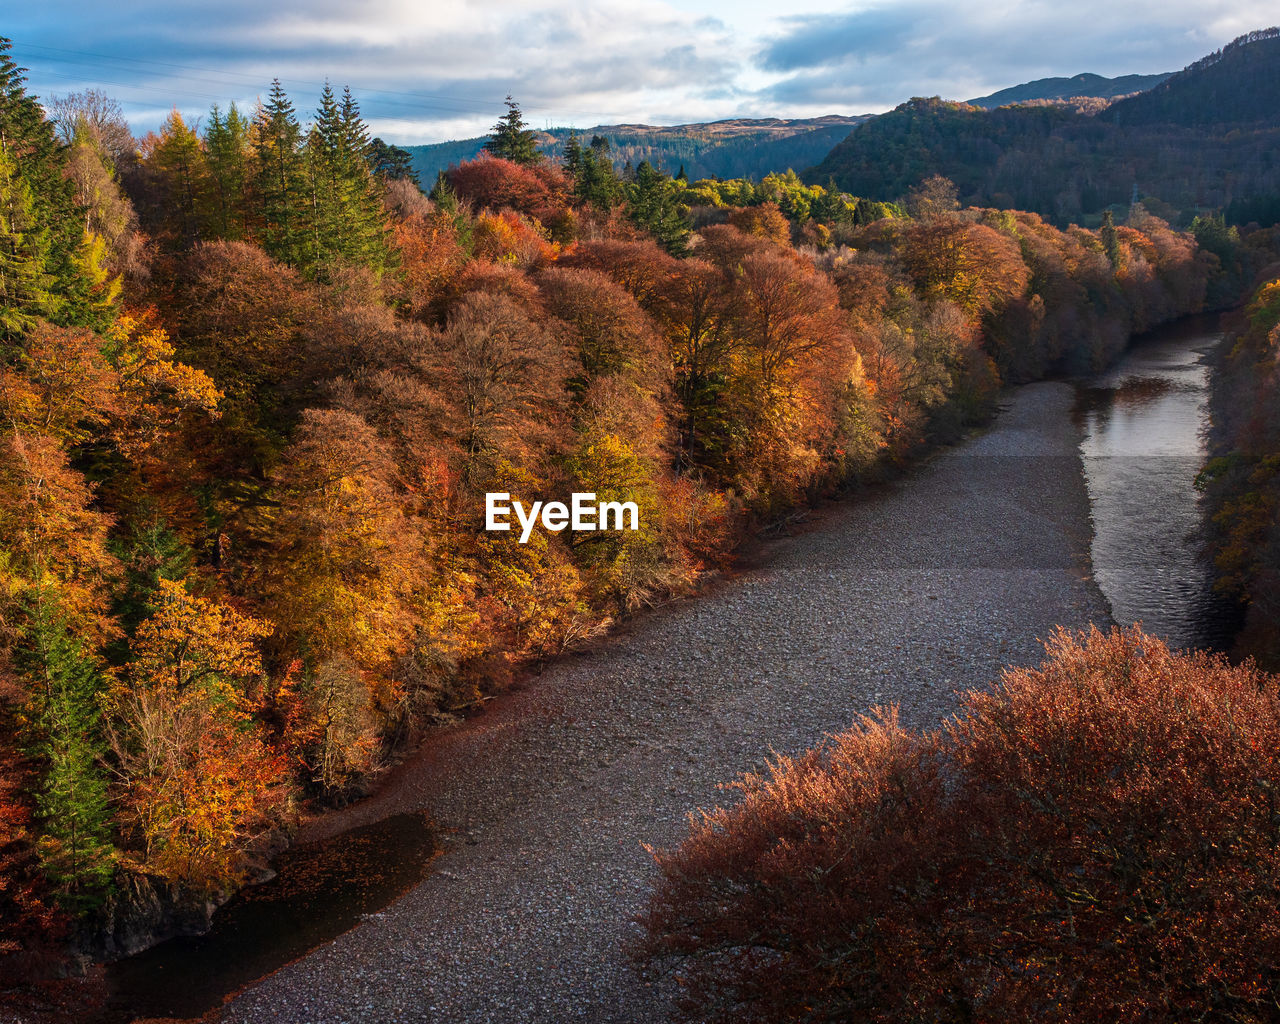 Autumn colours on the river garry near pitlochry in the scottish highlands